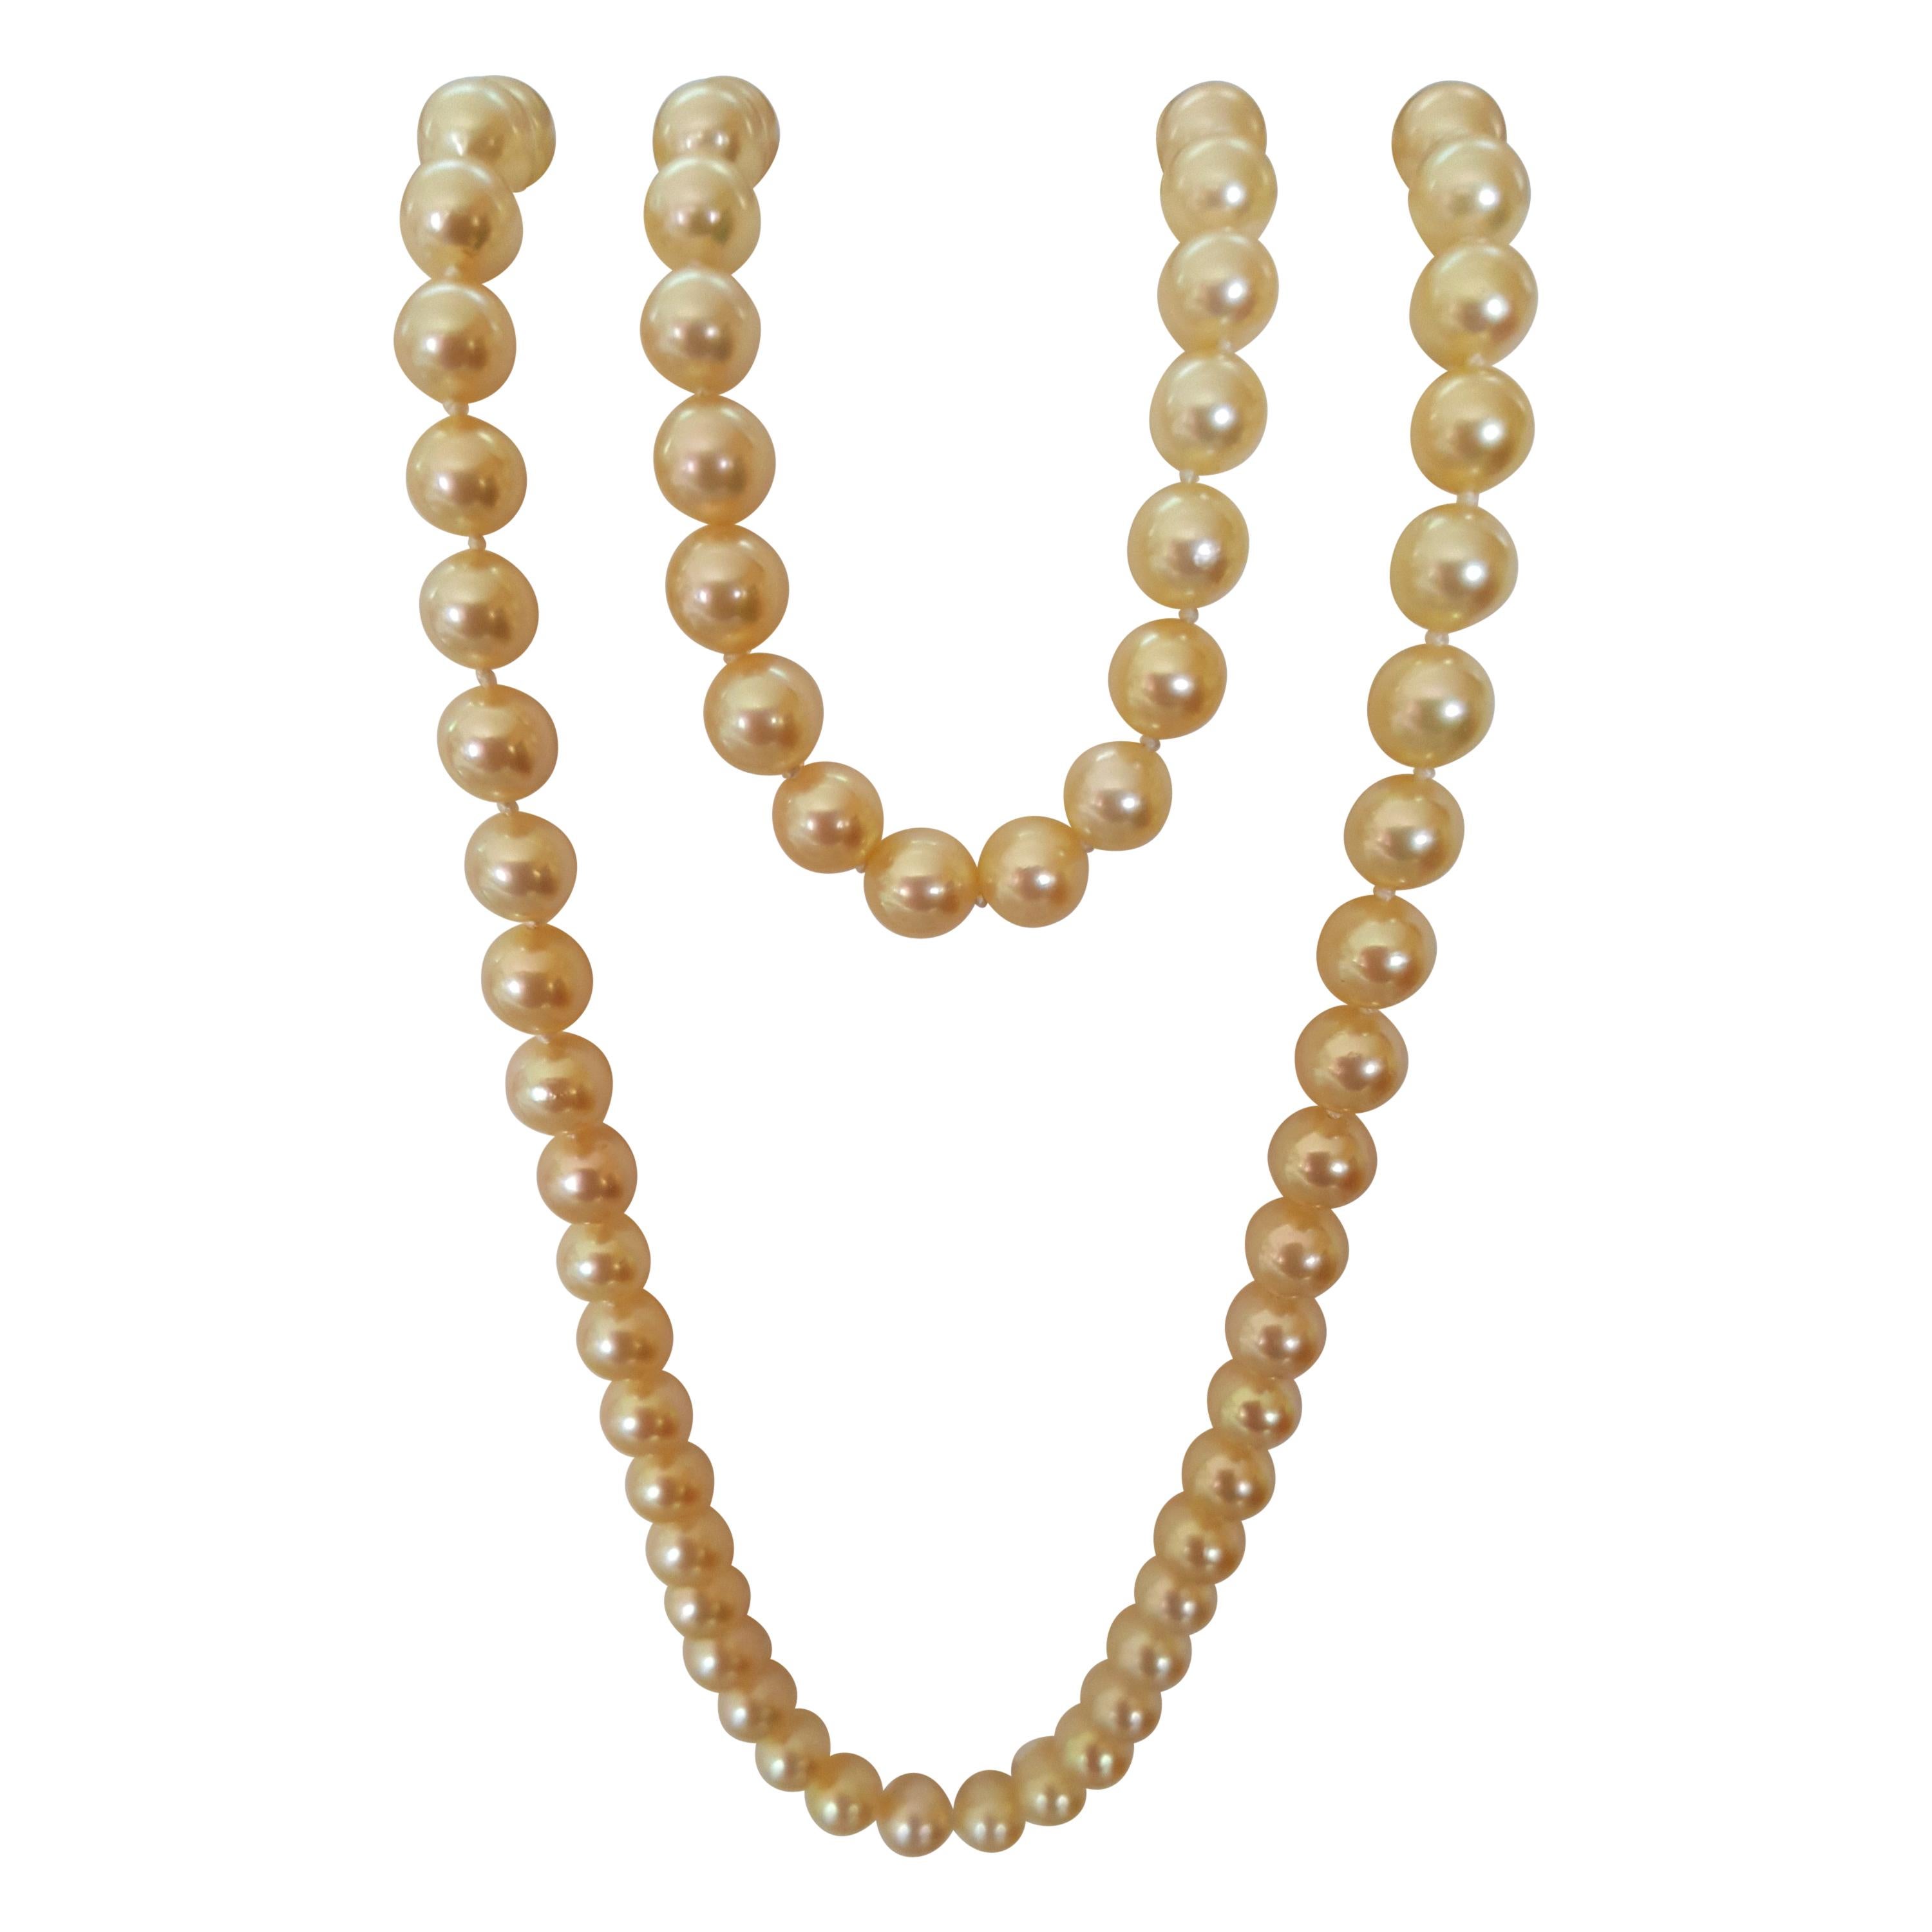 Cream Gold AAA Grade Cultured Pearl Set Necklace Bracelet 14kt, 7+mm, 27 Inches For Sale